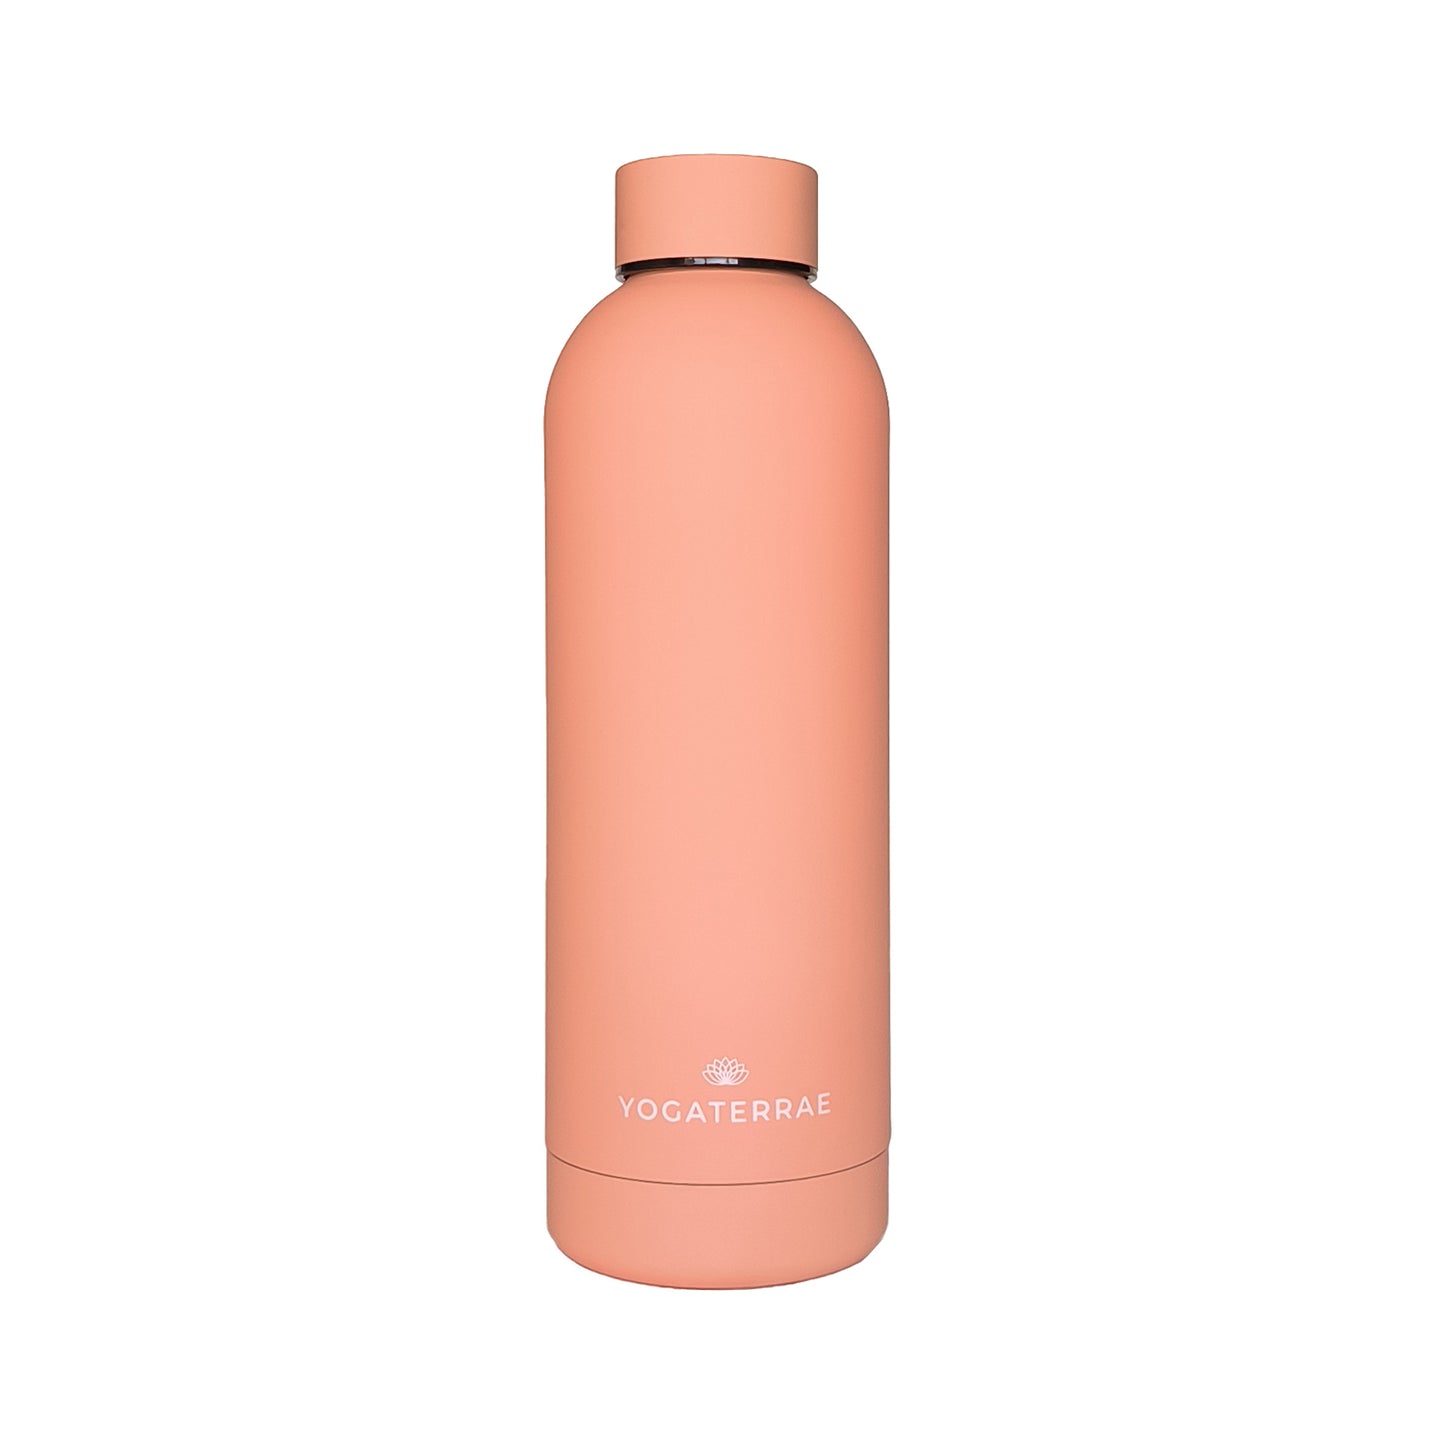 BOUTEILLE ISOTHERME CORAIL 500 ml